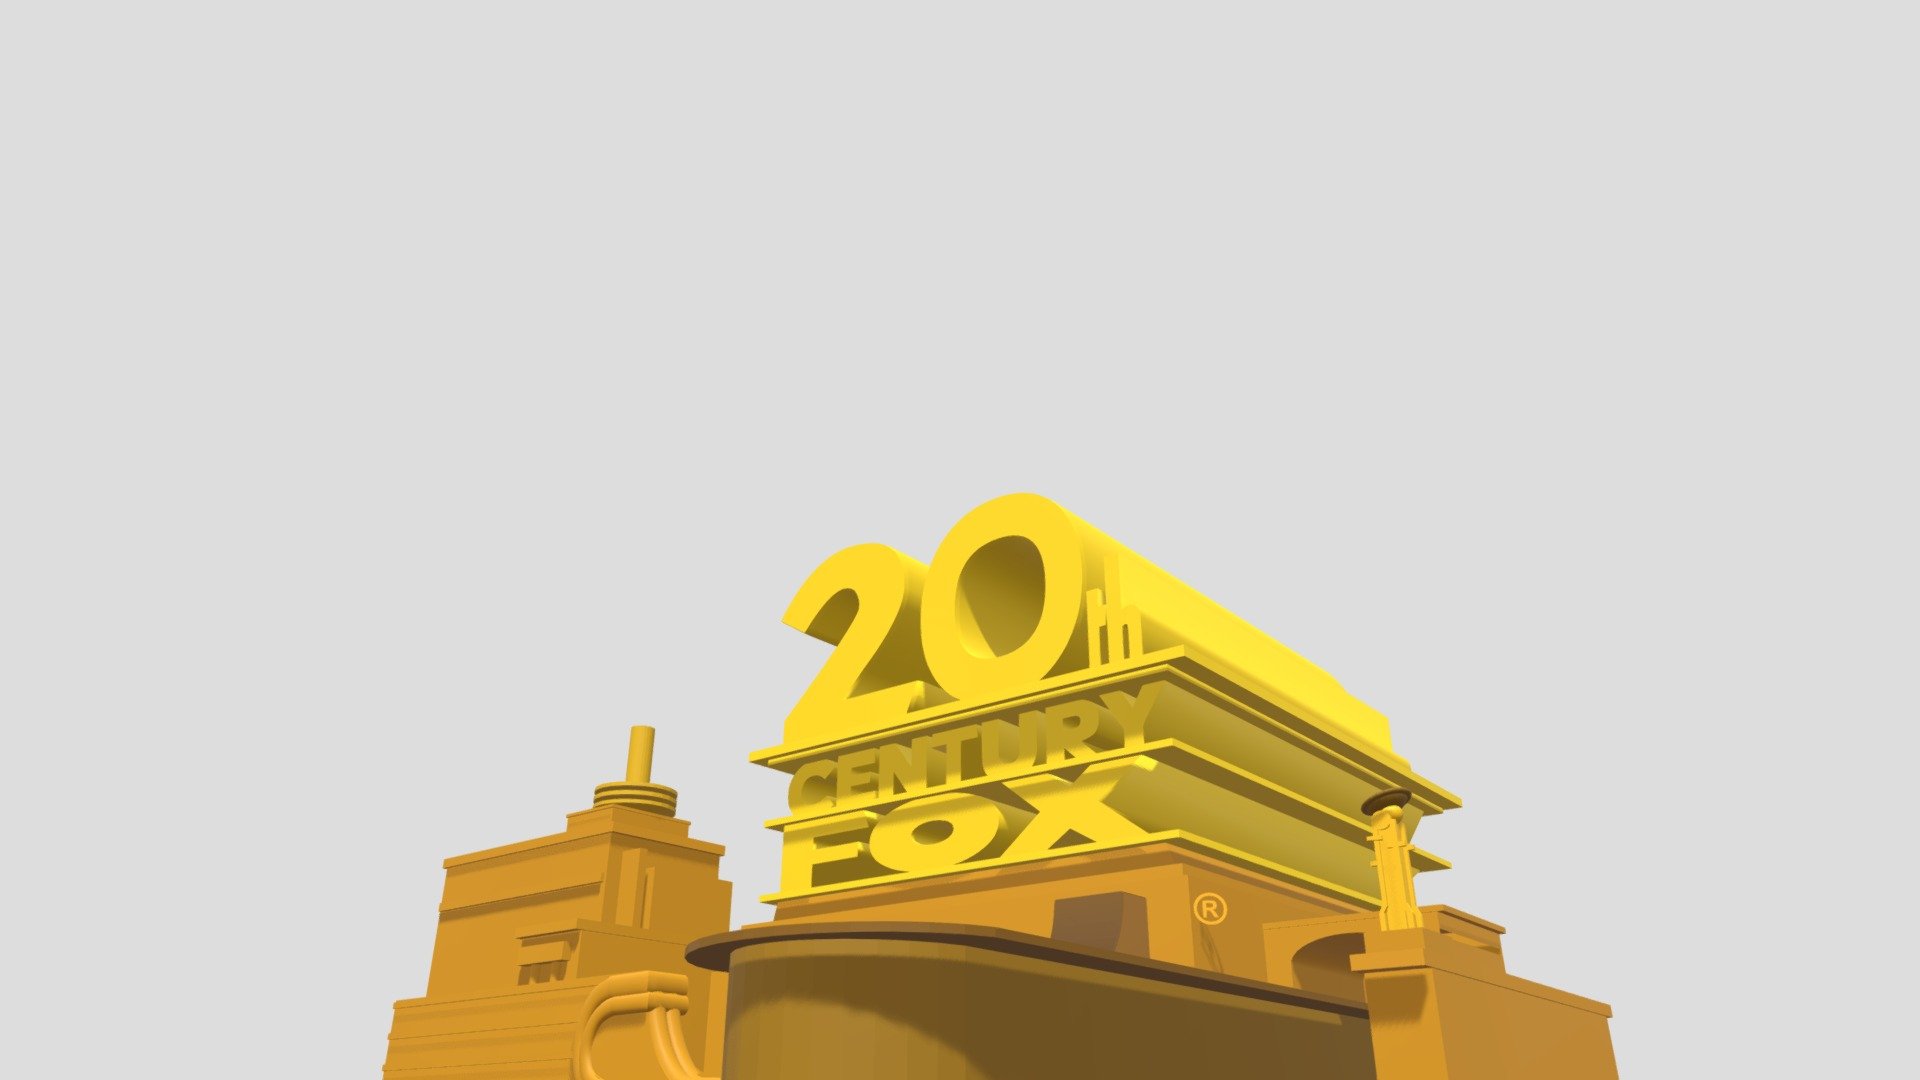 20th Century Fox 1981 Remake Download Free 3d Model By Ethan James